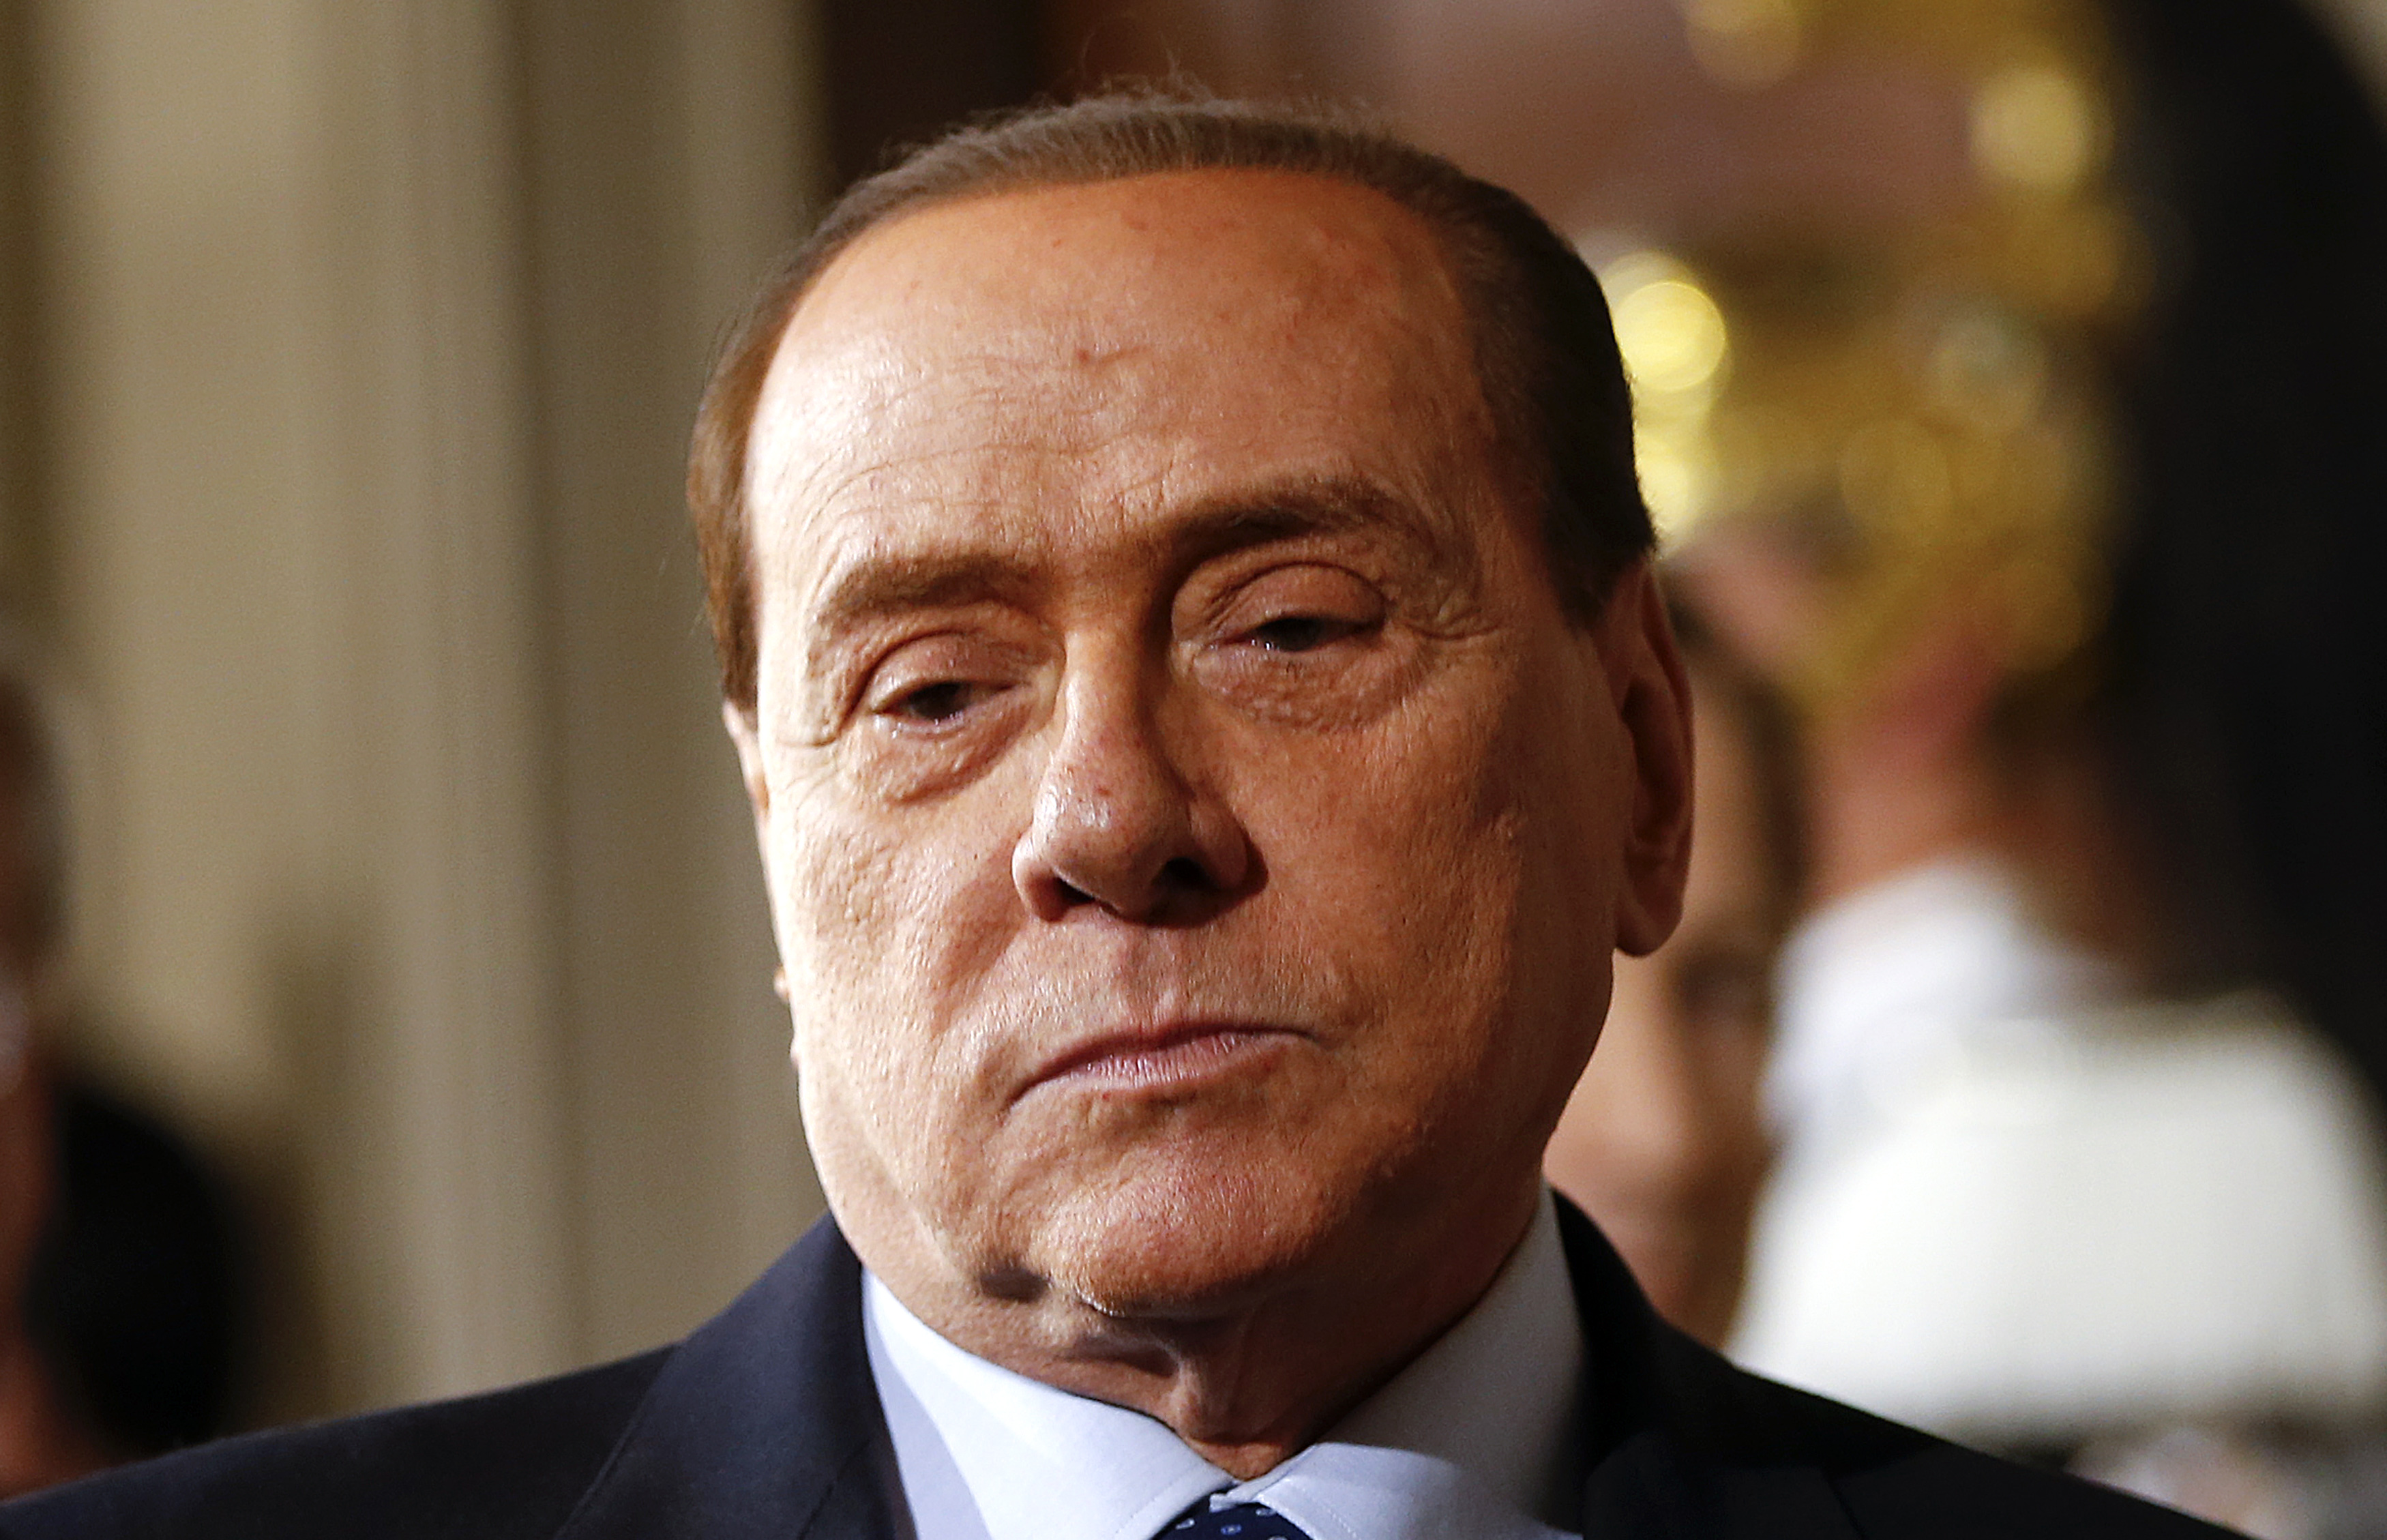 Leader of Forza Italia party Silvio Berlusconi at the end of the consultations with Italian President Giorgio Napolitano at the Quirinale Palace in Rome on Feb. 15, 2014. (Tony Gentile—Reuters)